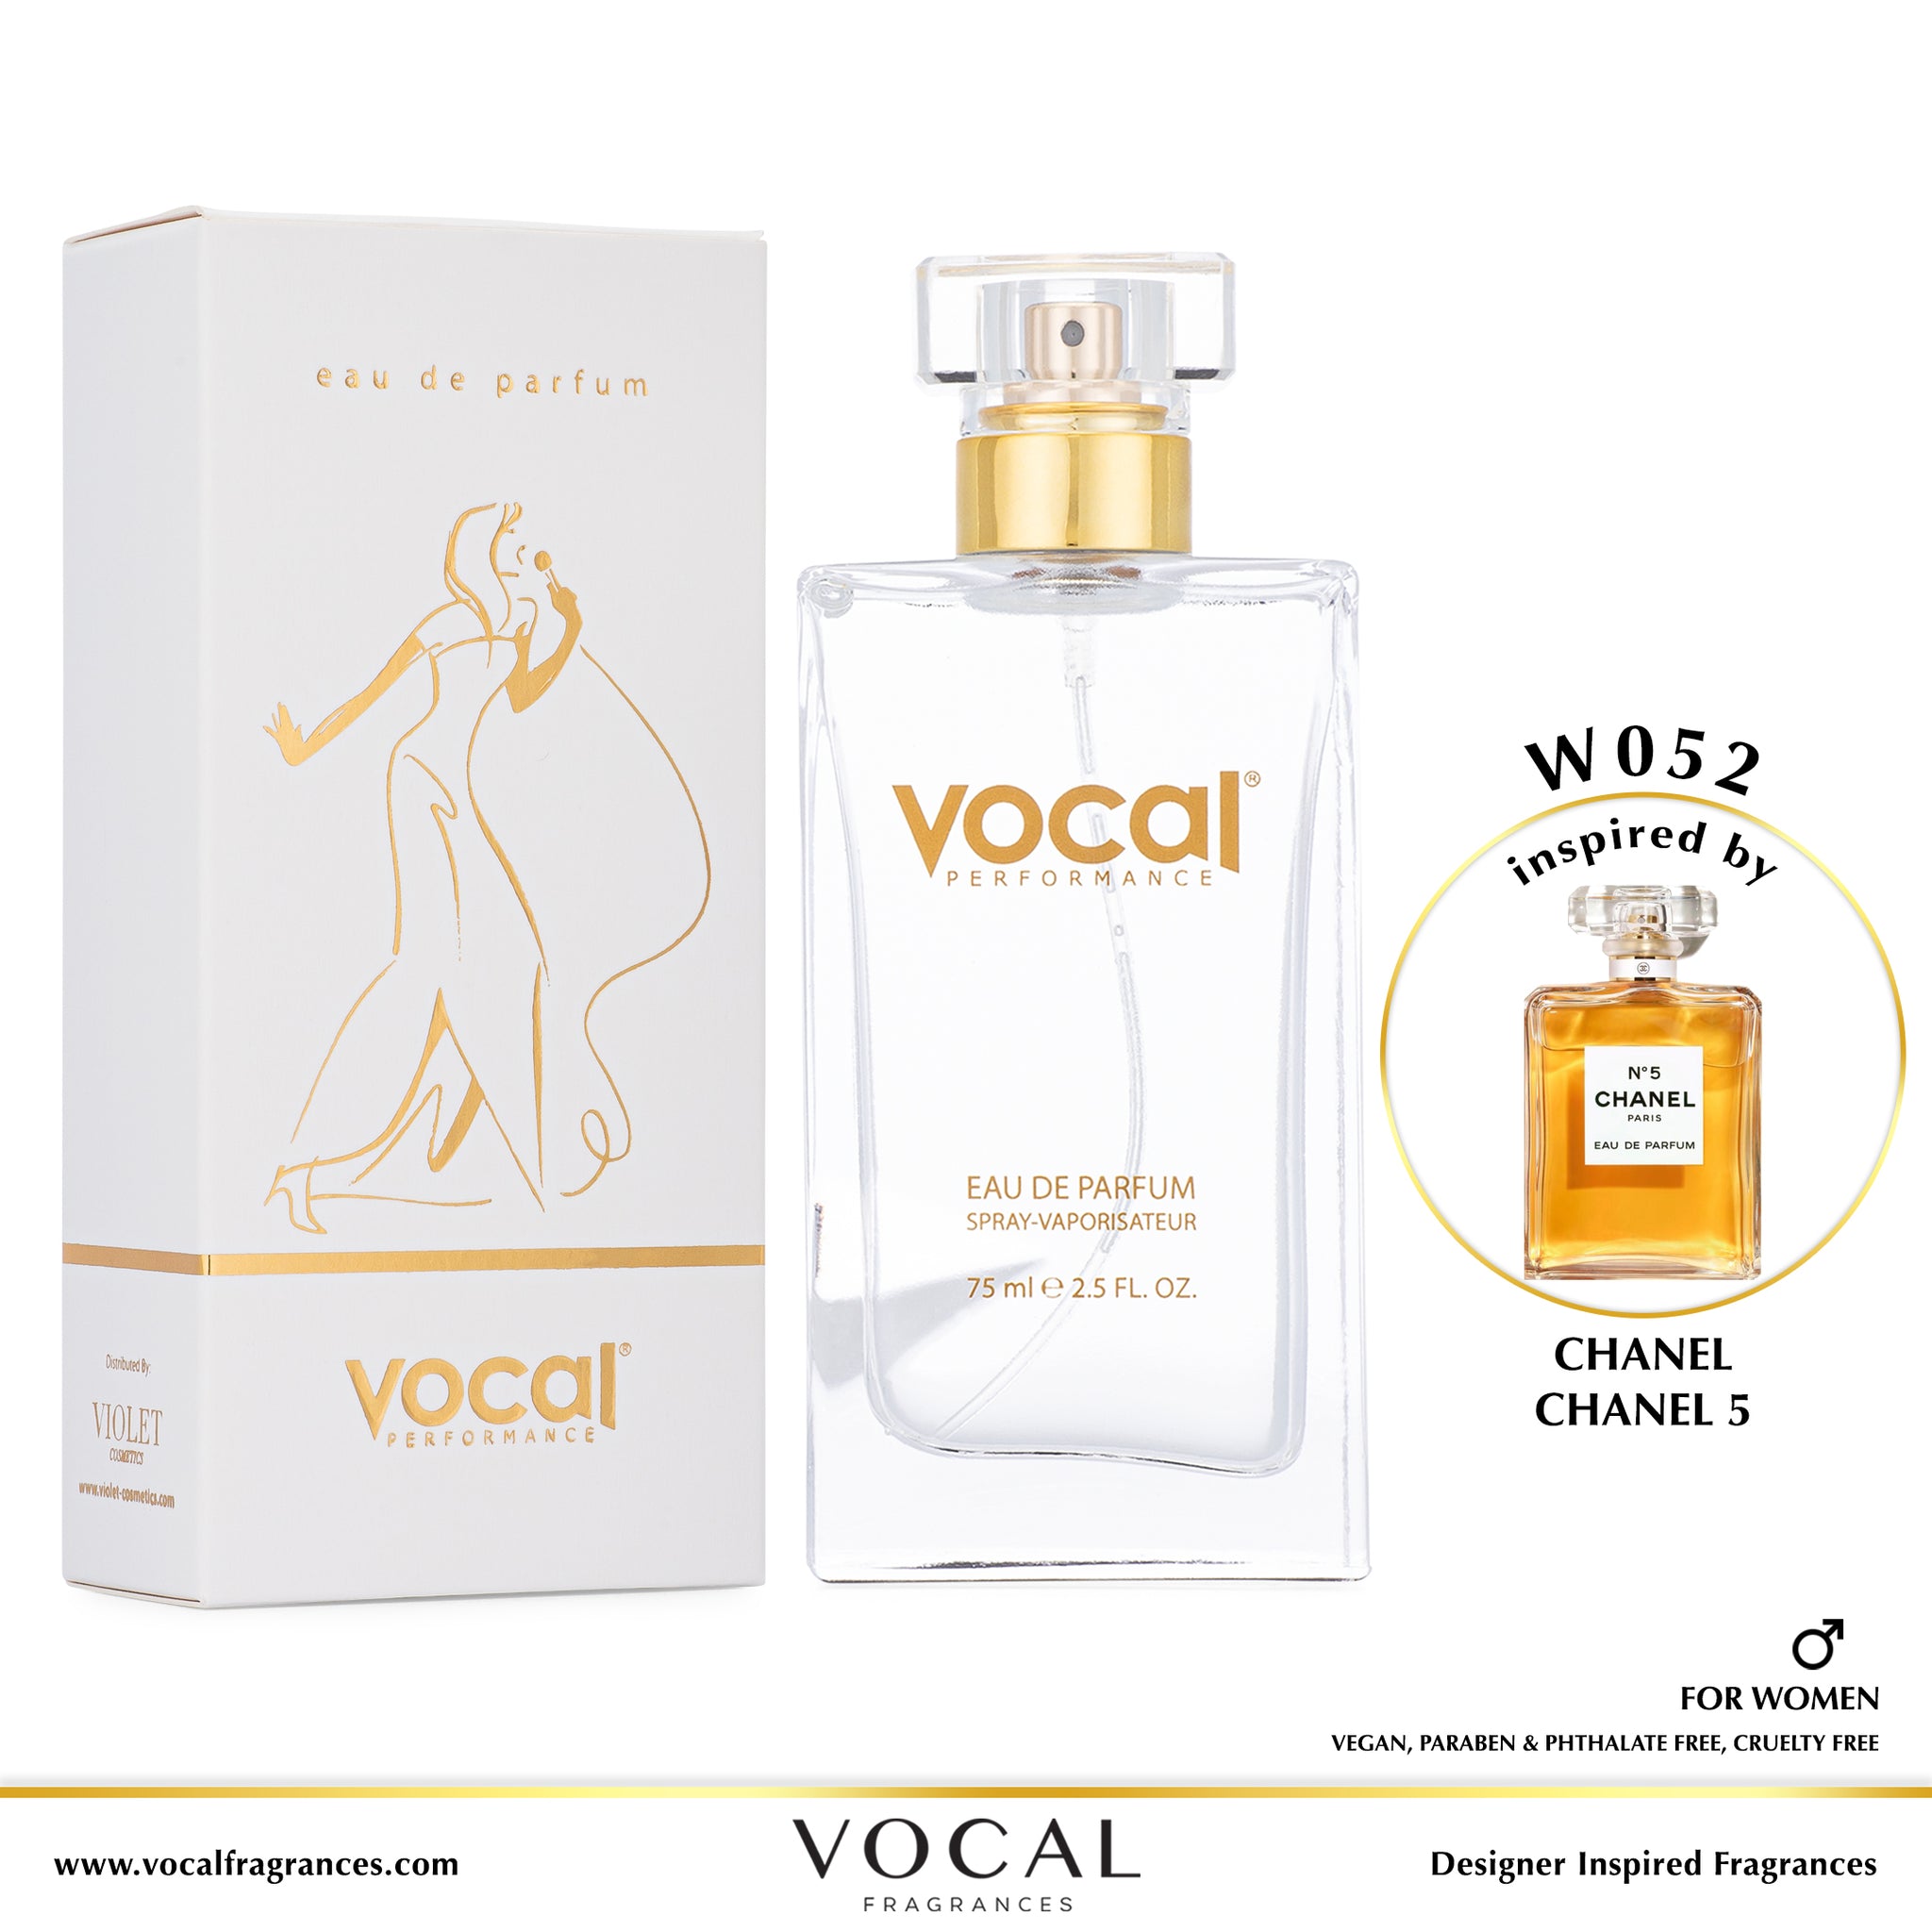 W052 Vocal Performance Eau De Parfum For Women Inspired by Chanel